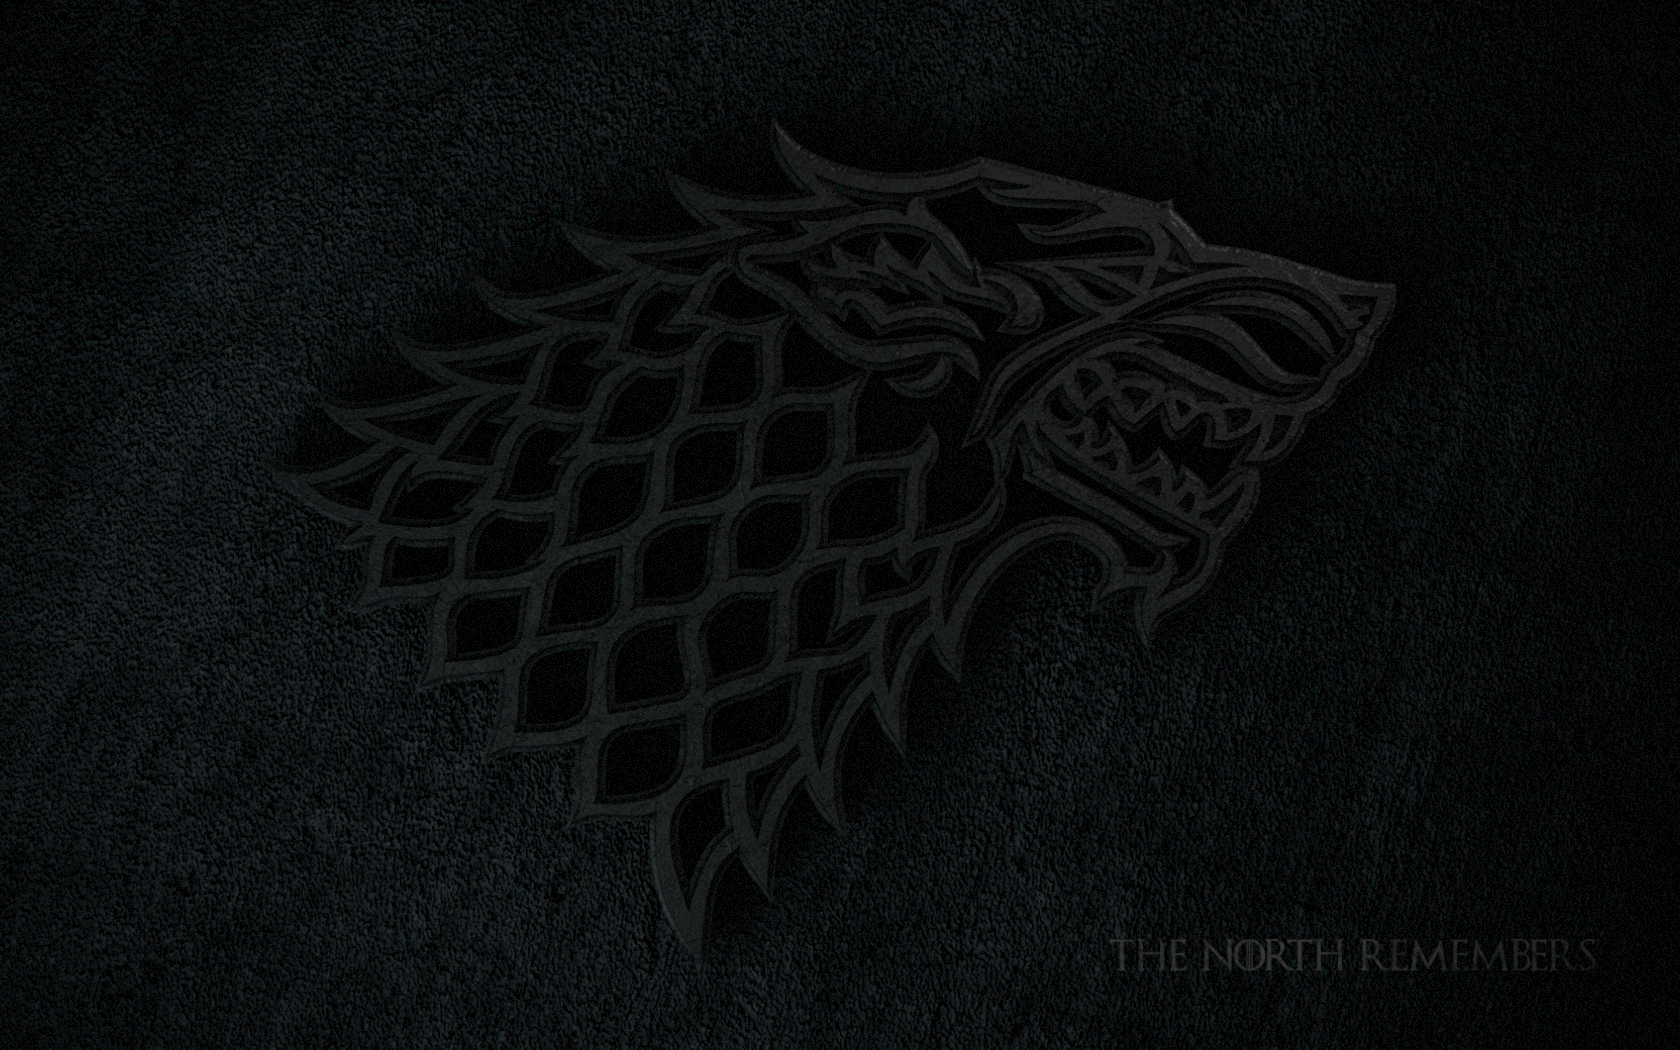 the north remembers by uxomi fan art wallpaper movies tv 2014 uxomi no